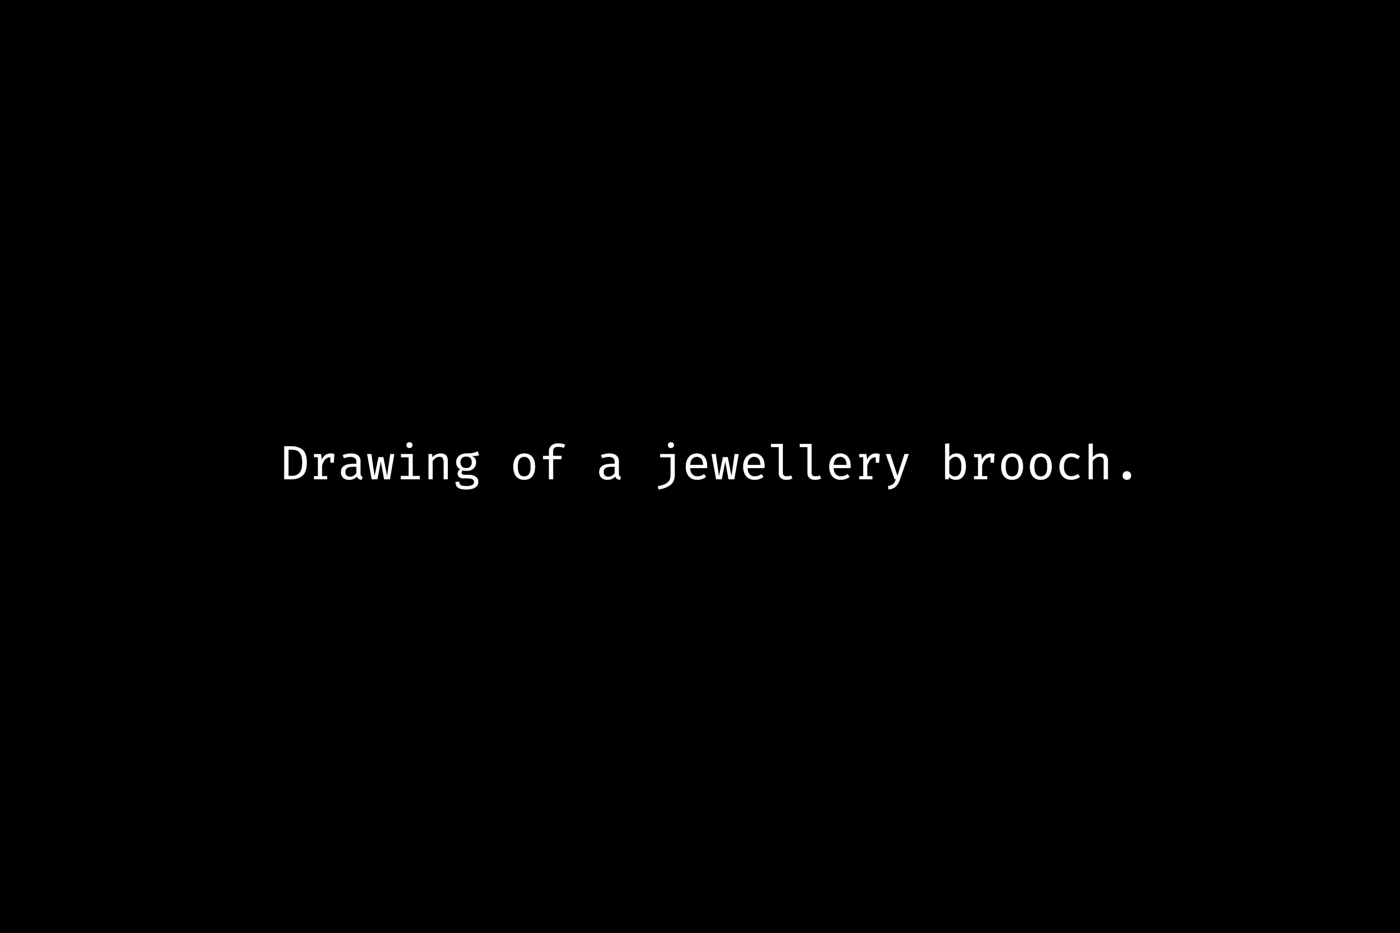 Simple written example of alt text added to a Twitter image, saying 'Drawing of a jewellery brooch."